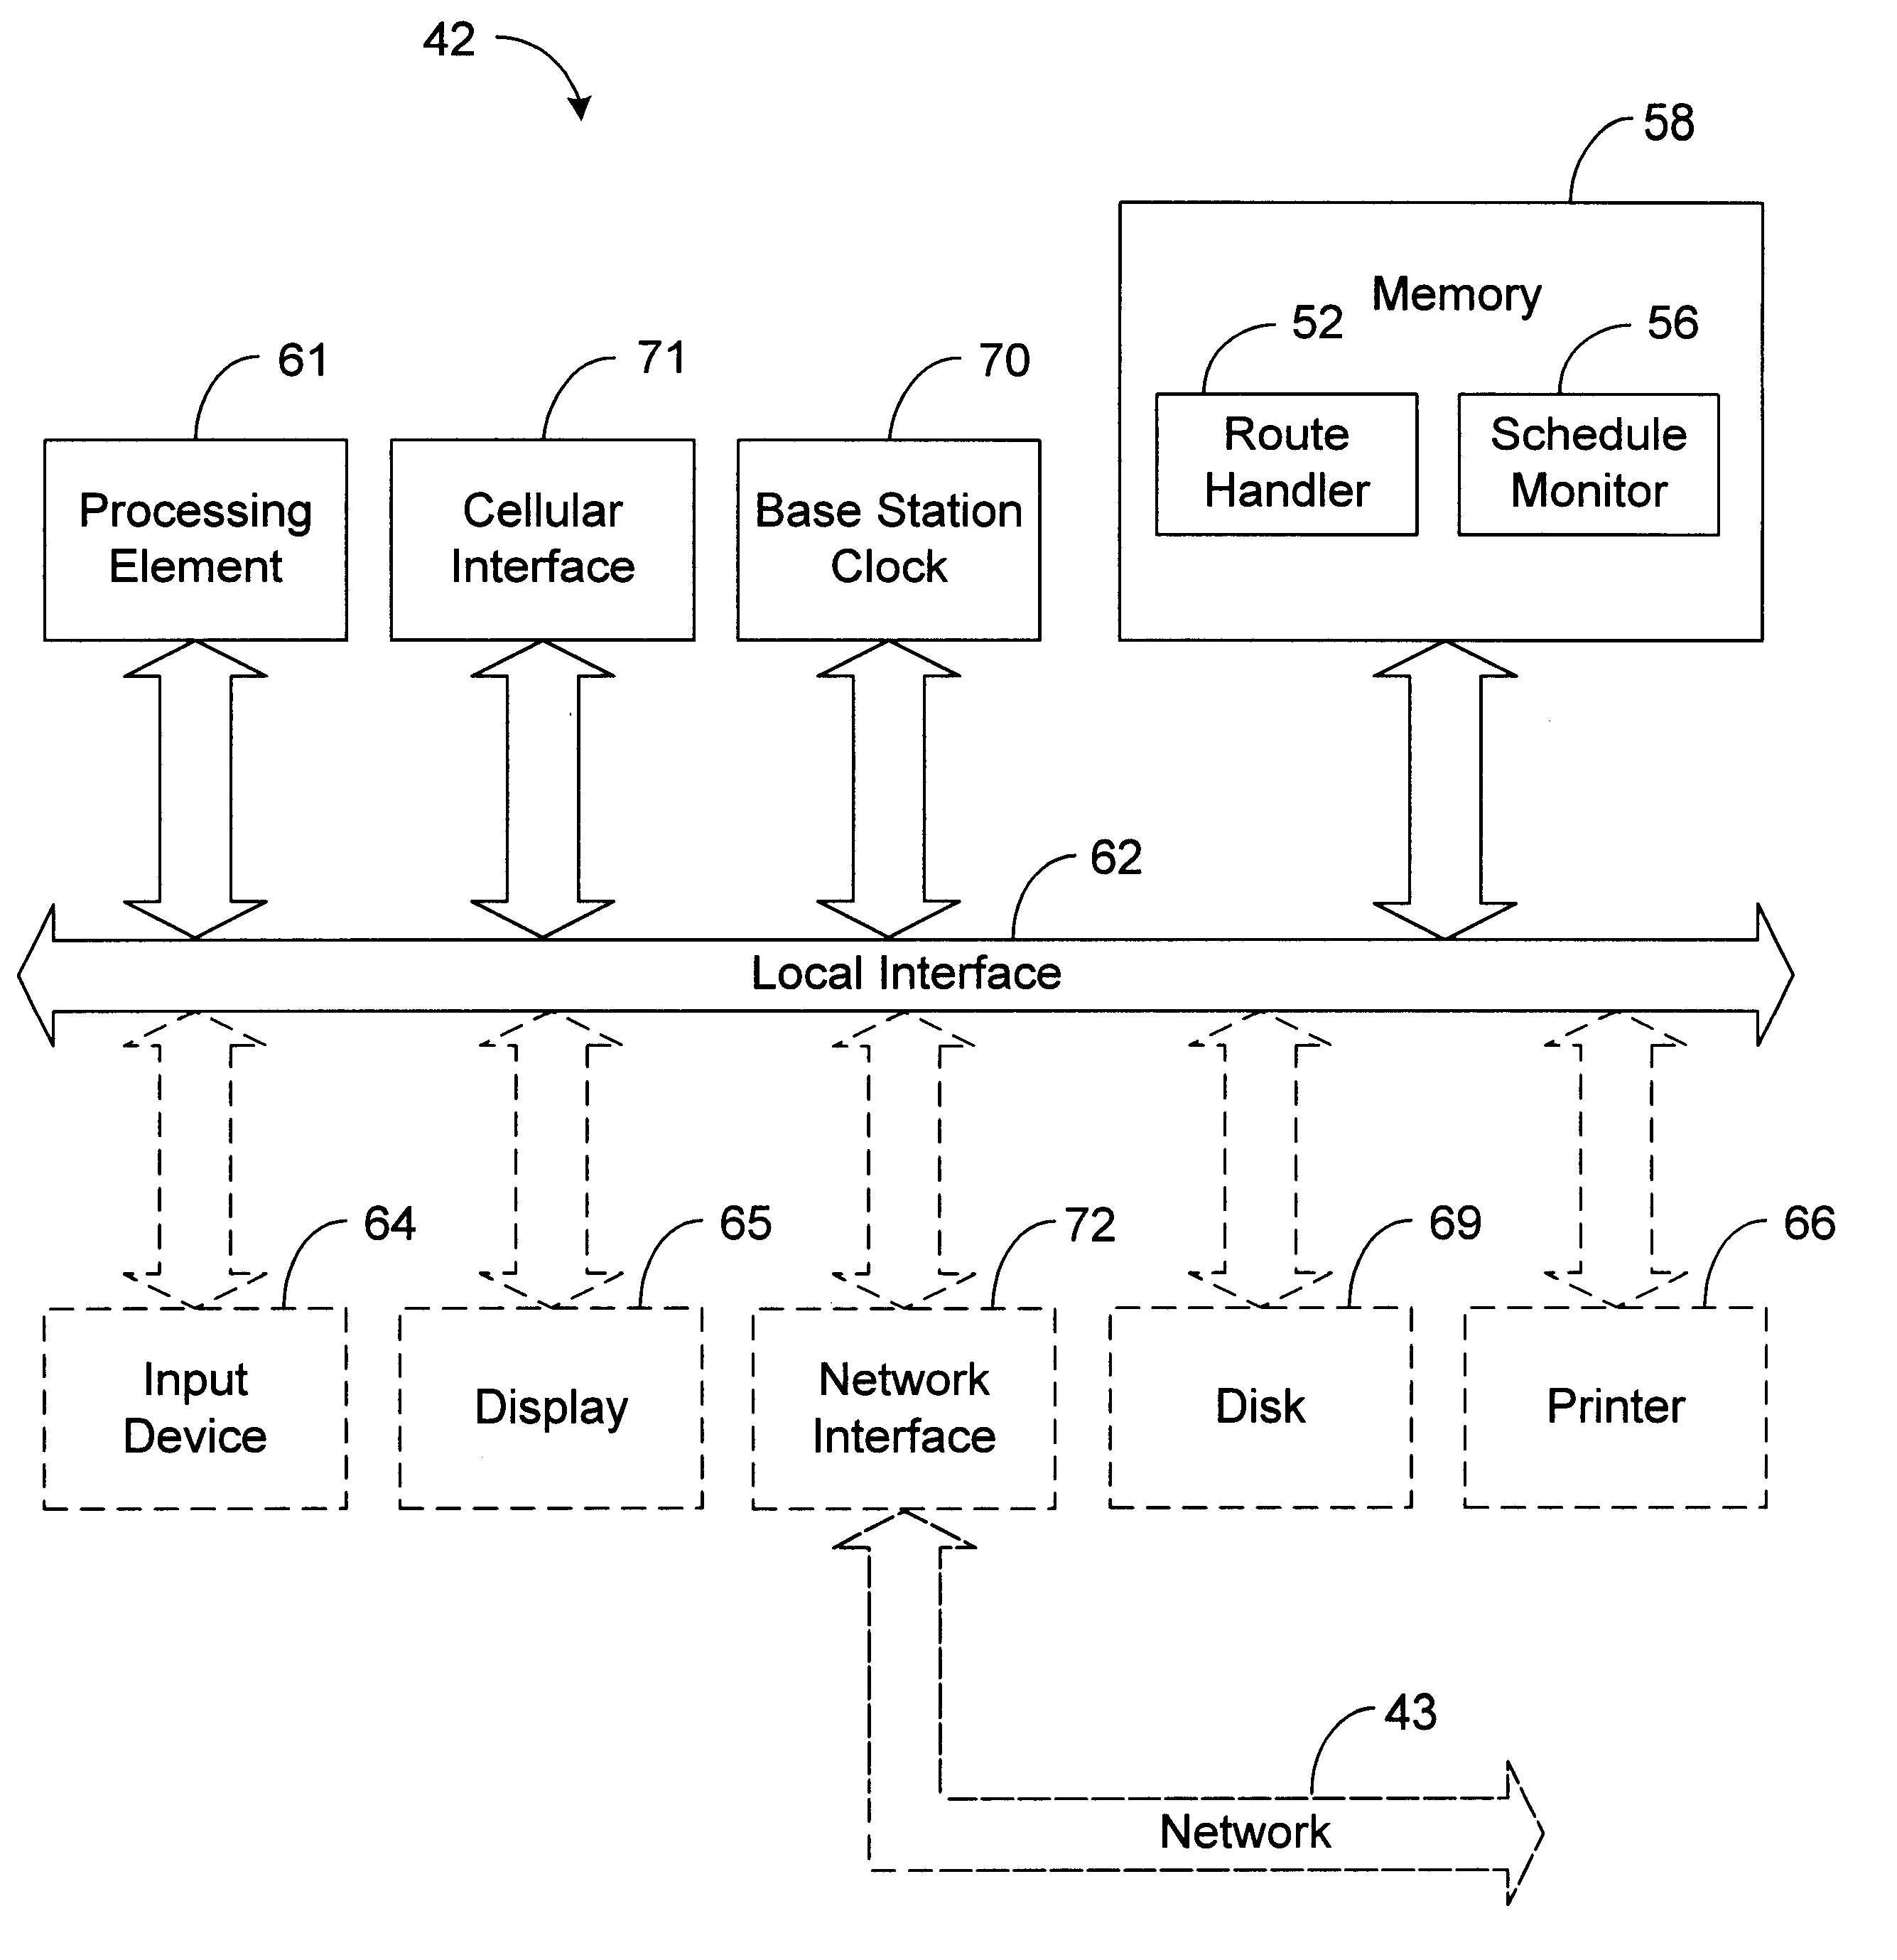 Base station system and method for monitoring travel of mobile vehicles and communicating notification messages